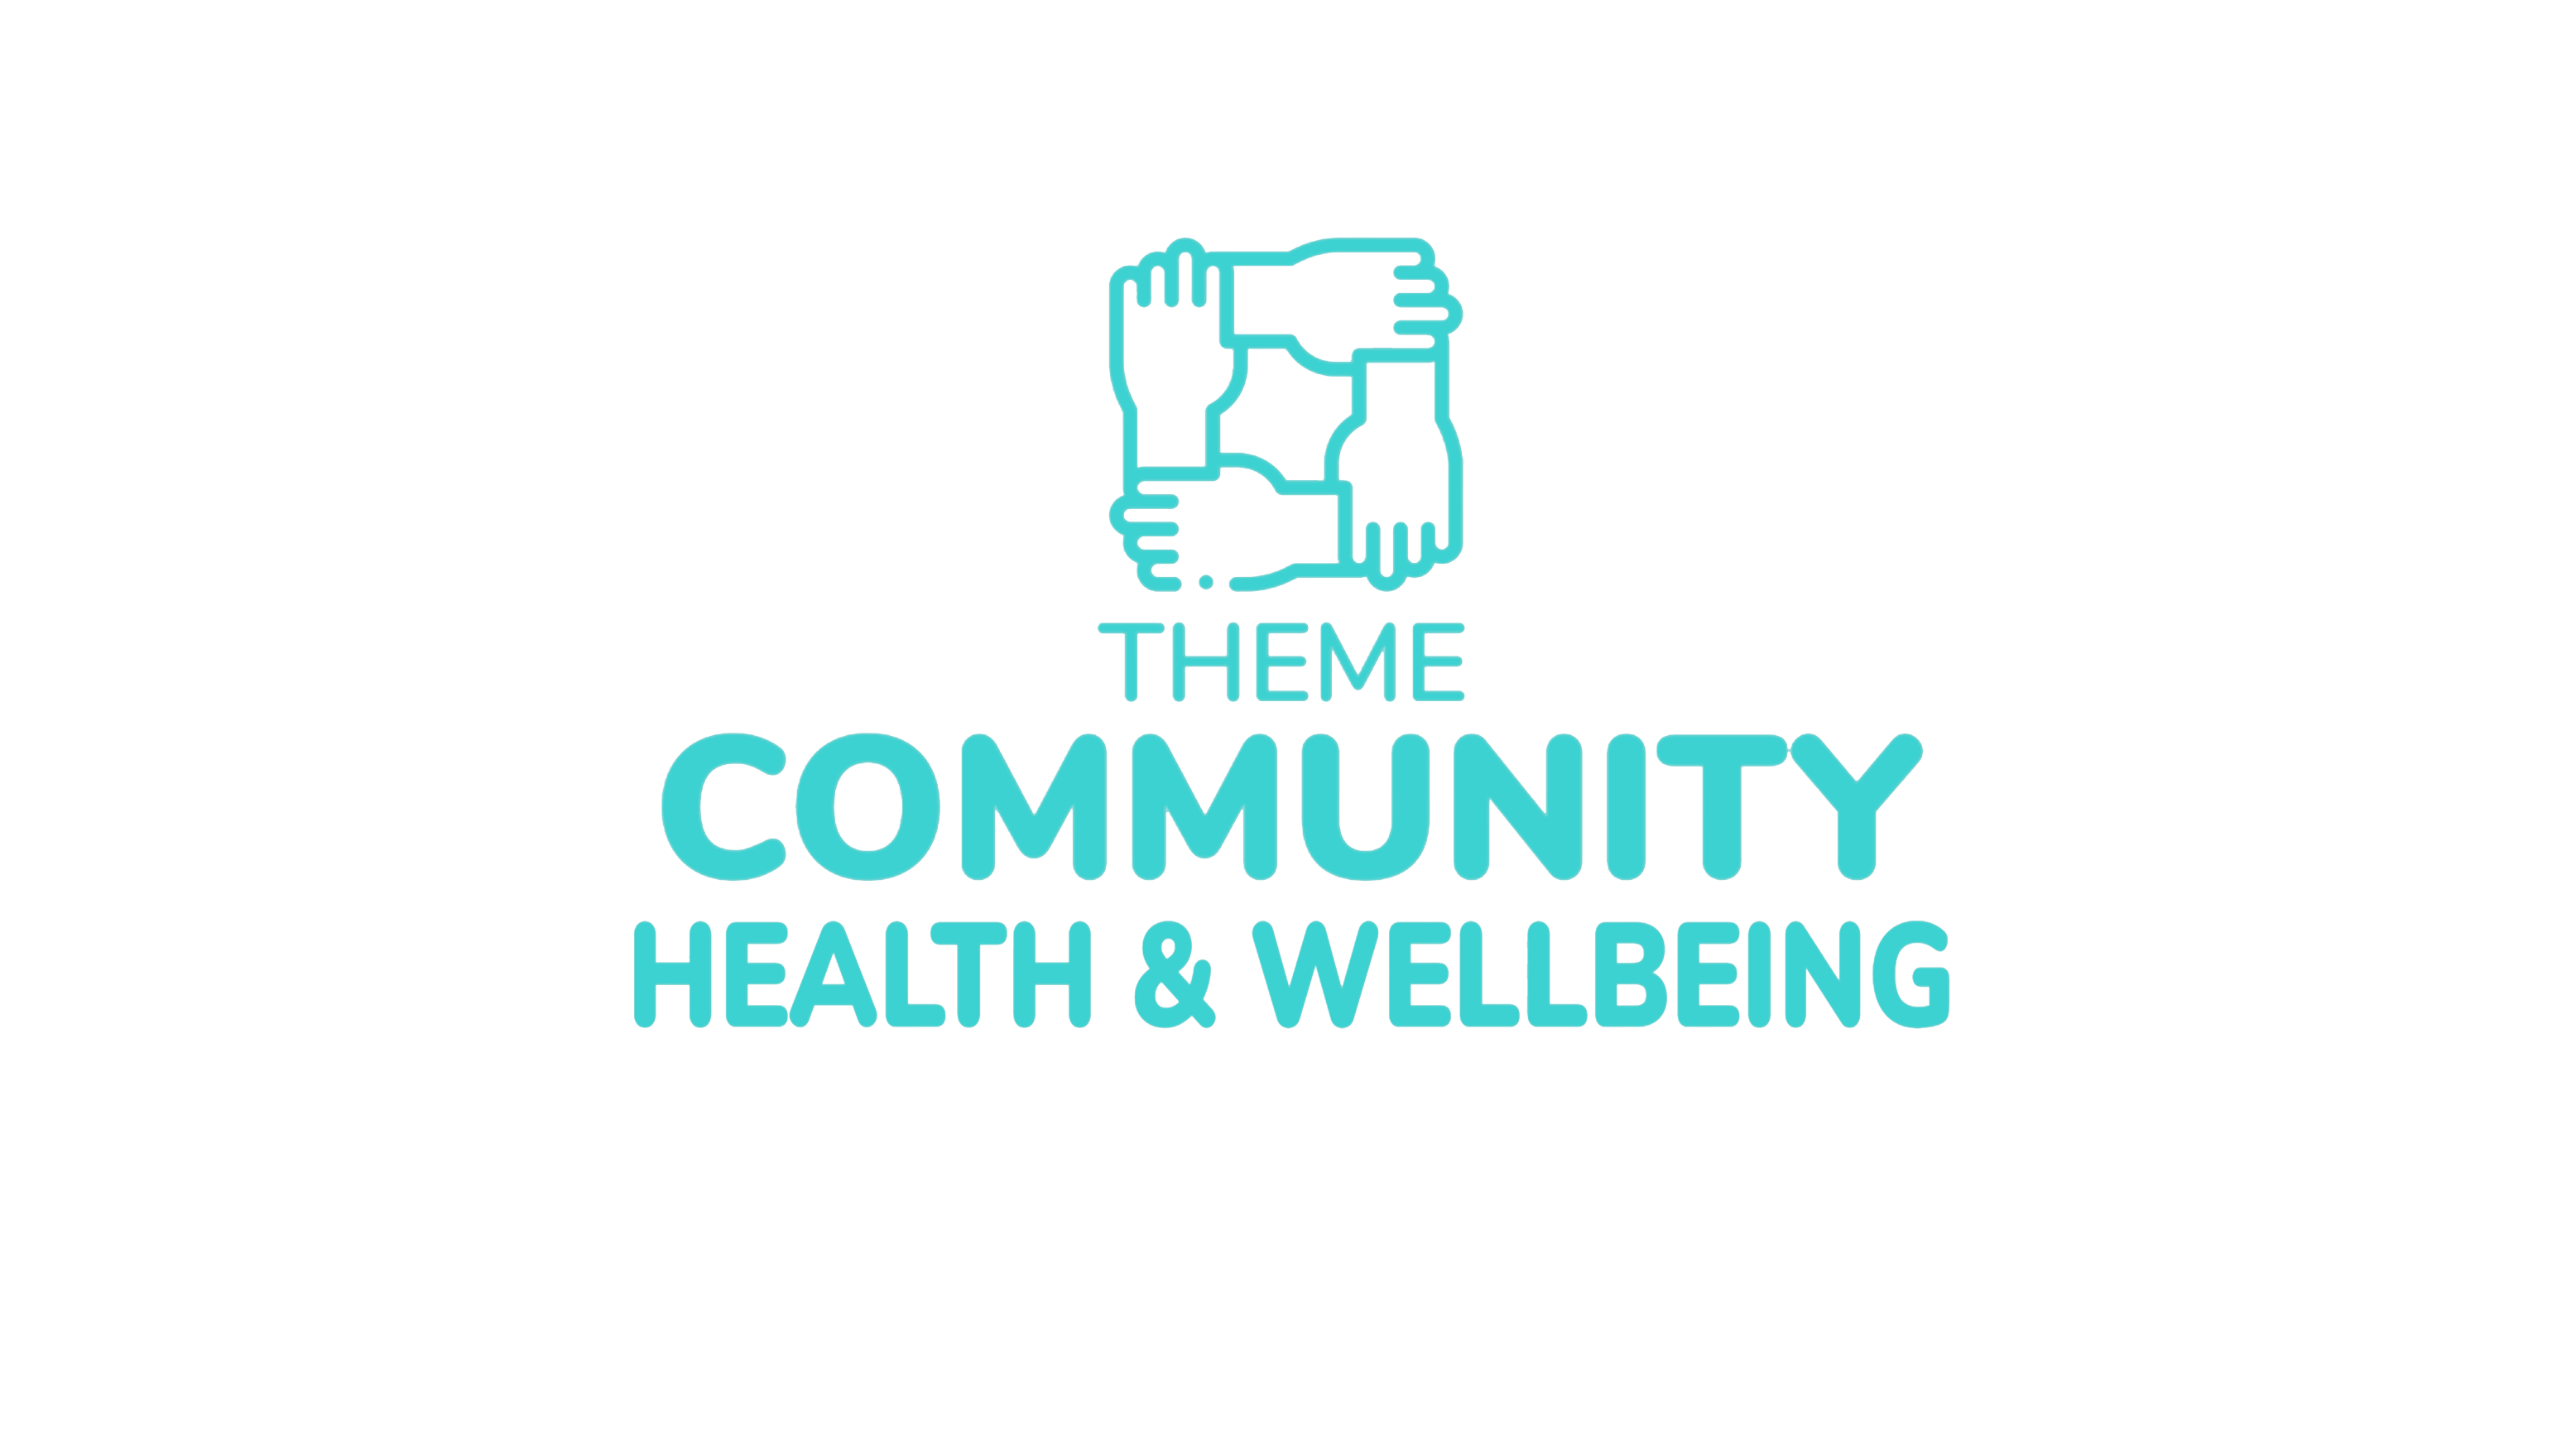 Community, Health and Wellbeing